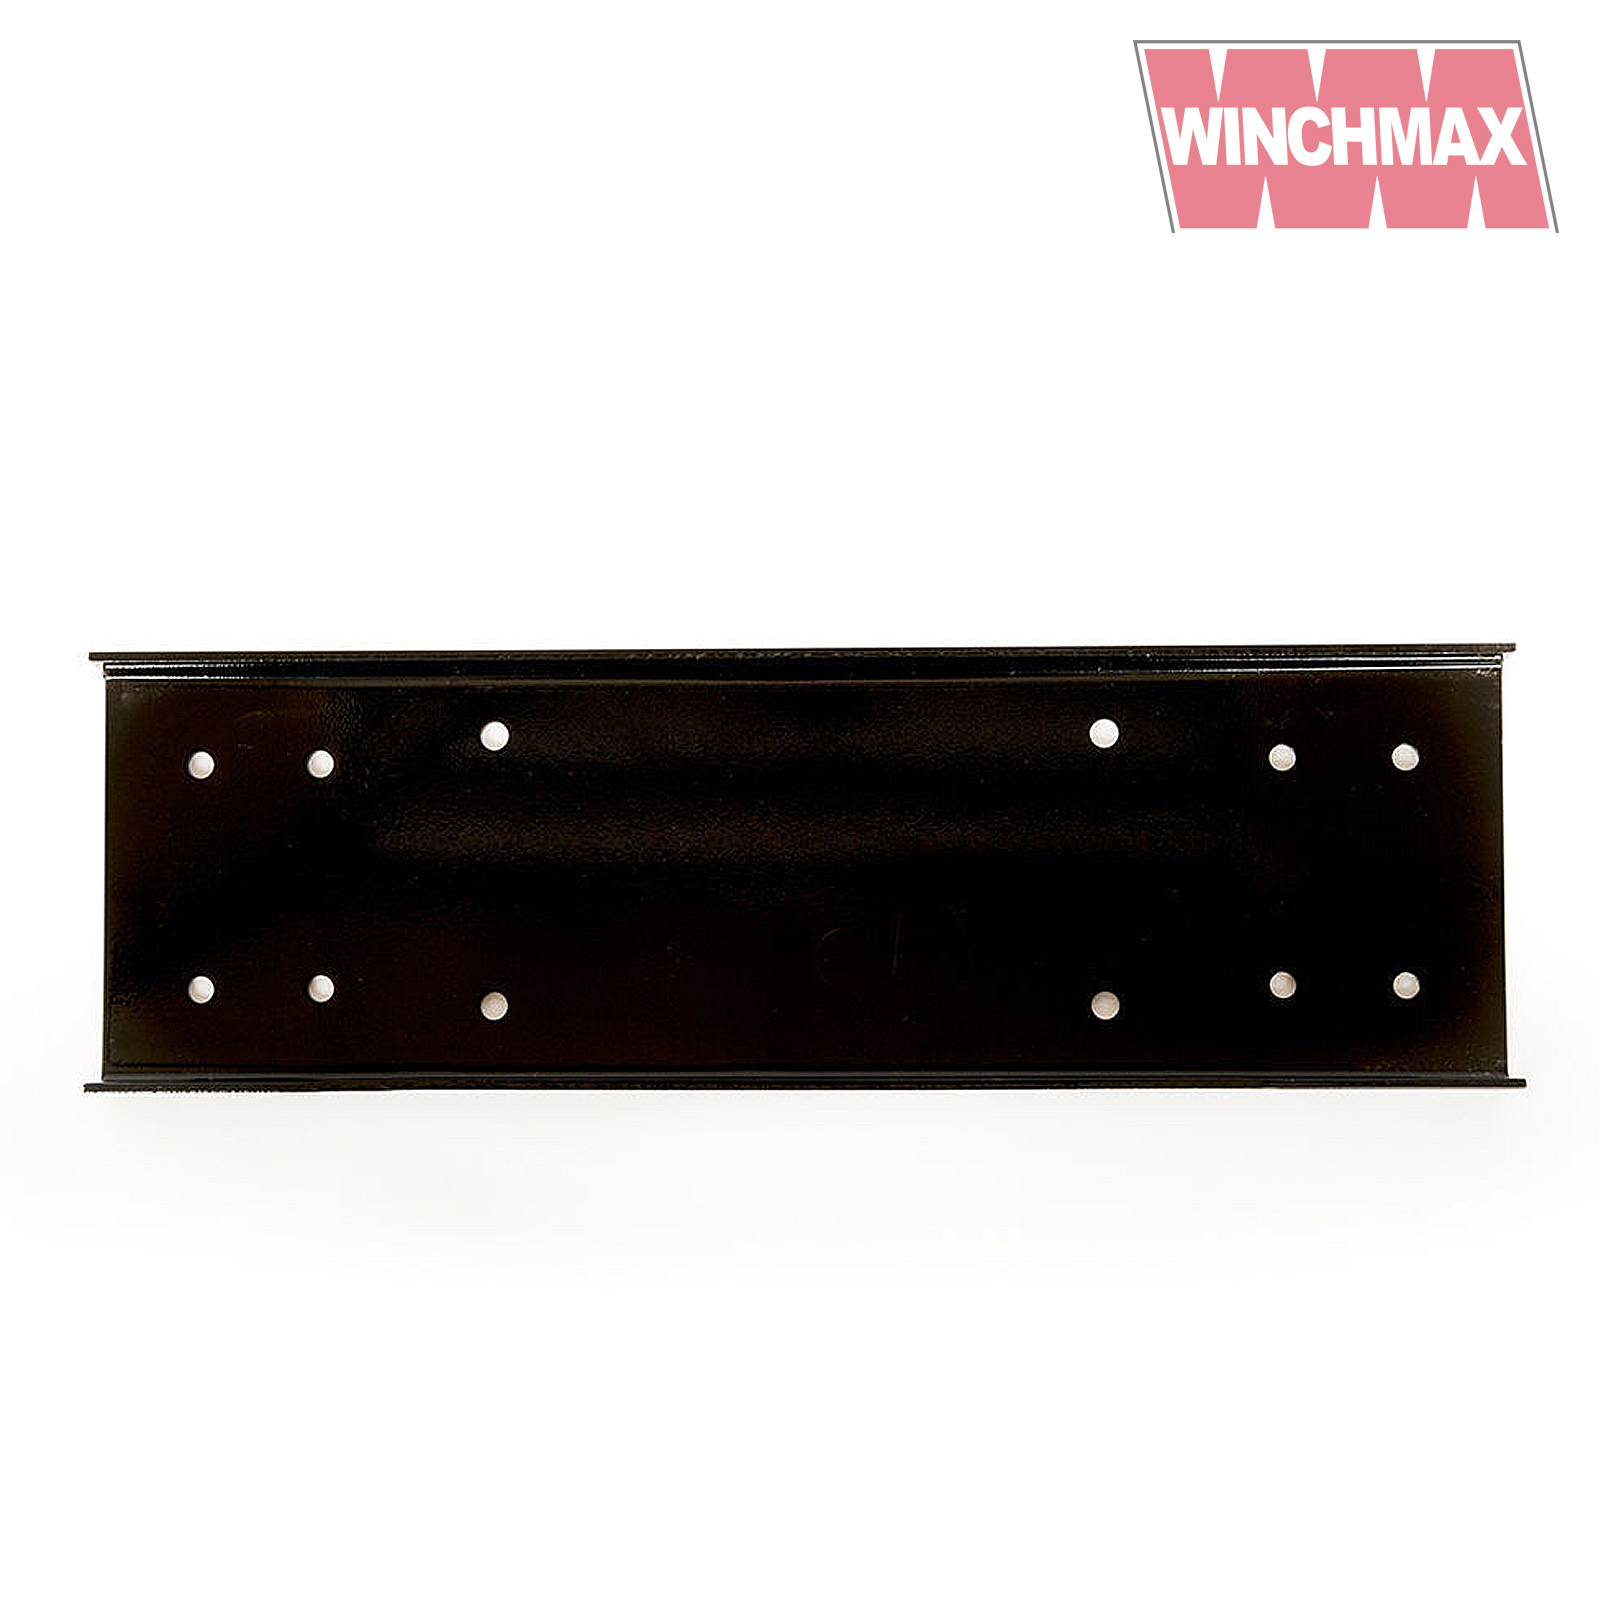 Winchmax WMMP2 Compact Mounting Plate